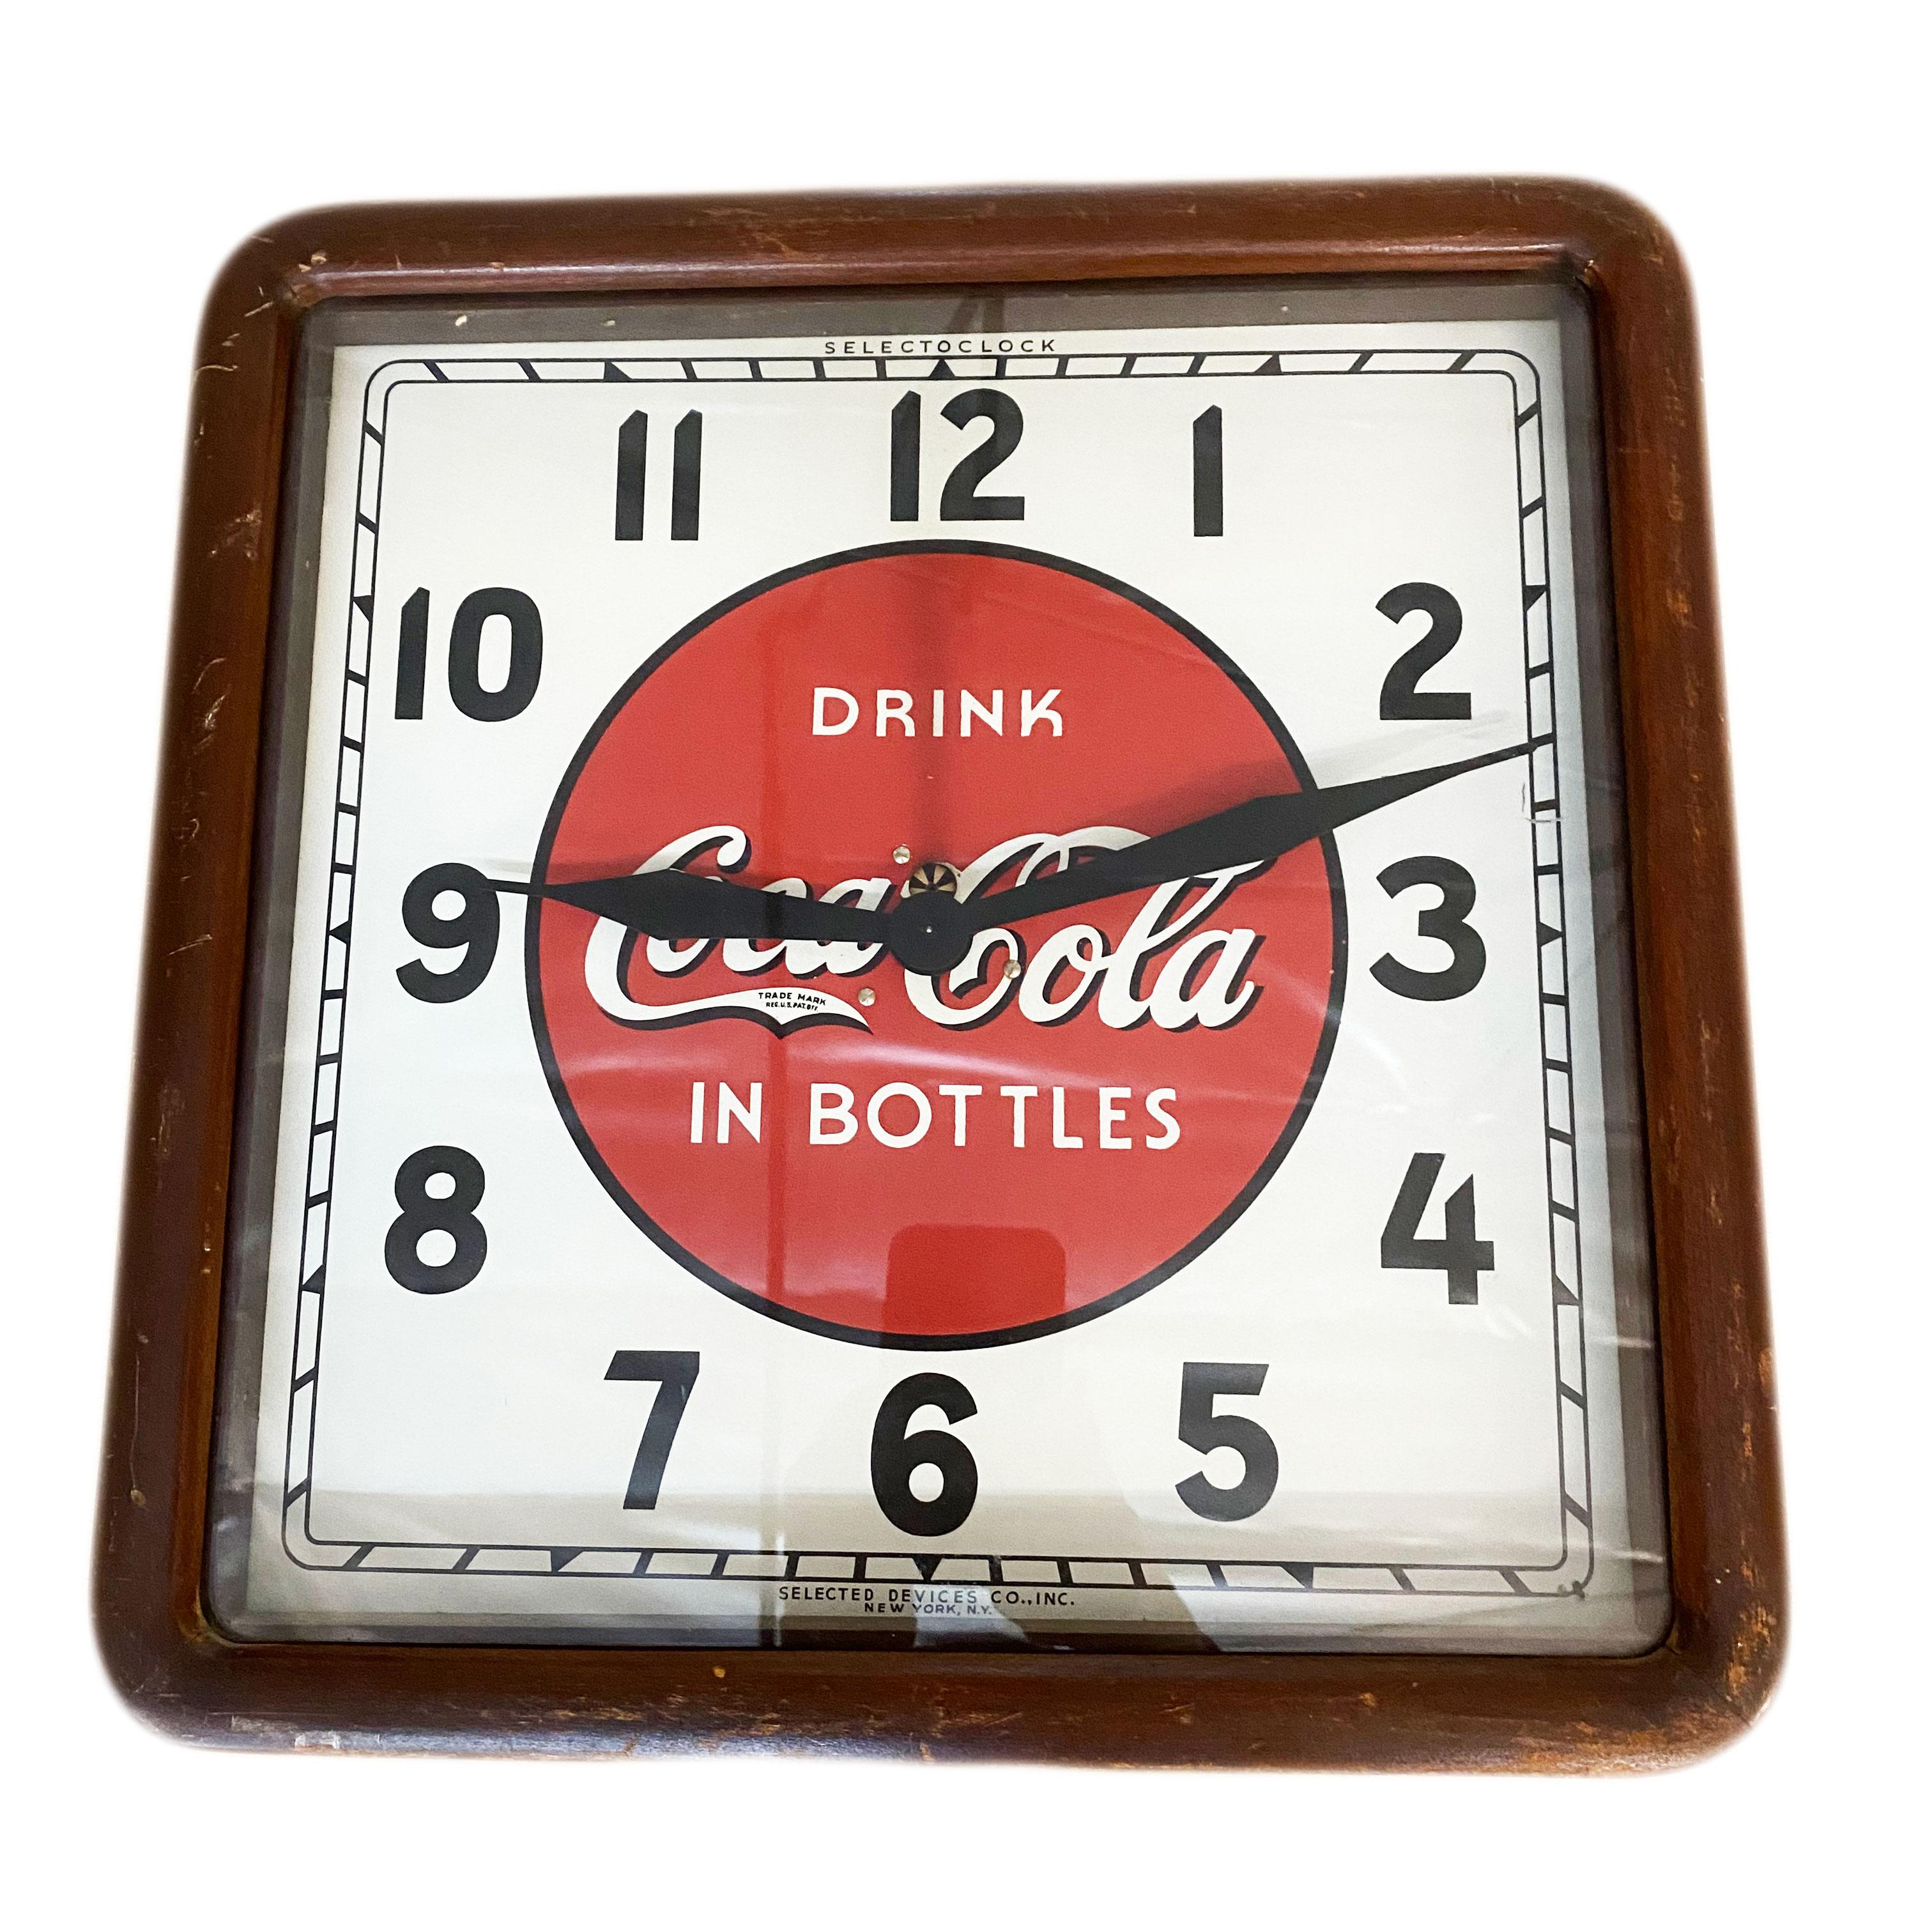 1939 Coca-Cola wood frame wall clock by Selected Devices New York, NY

Clock’s face, hands and wooden frame are totally original and intact but the movement has been replaced with a quartz battery operated one. Measures 16